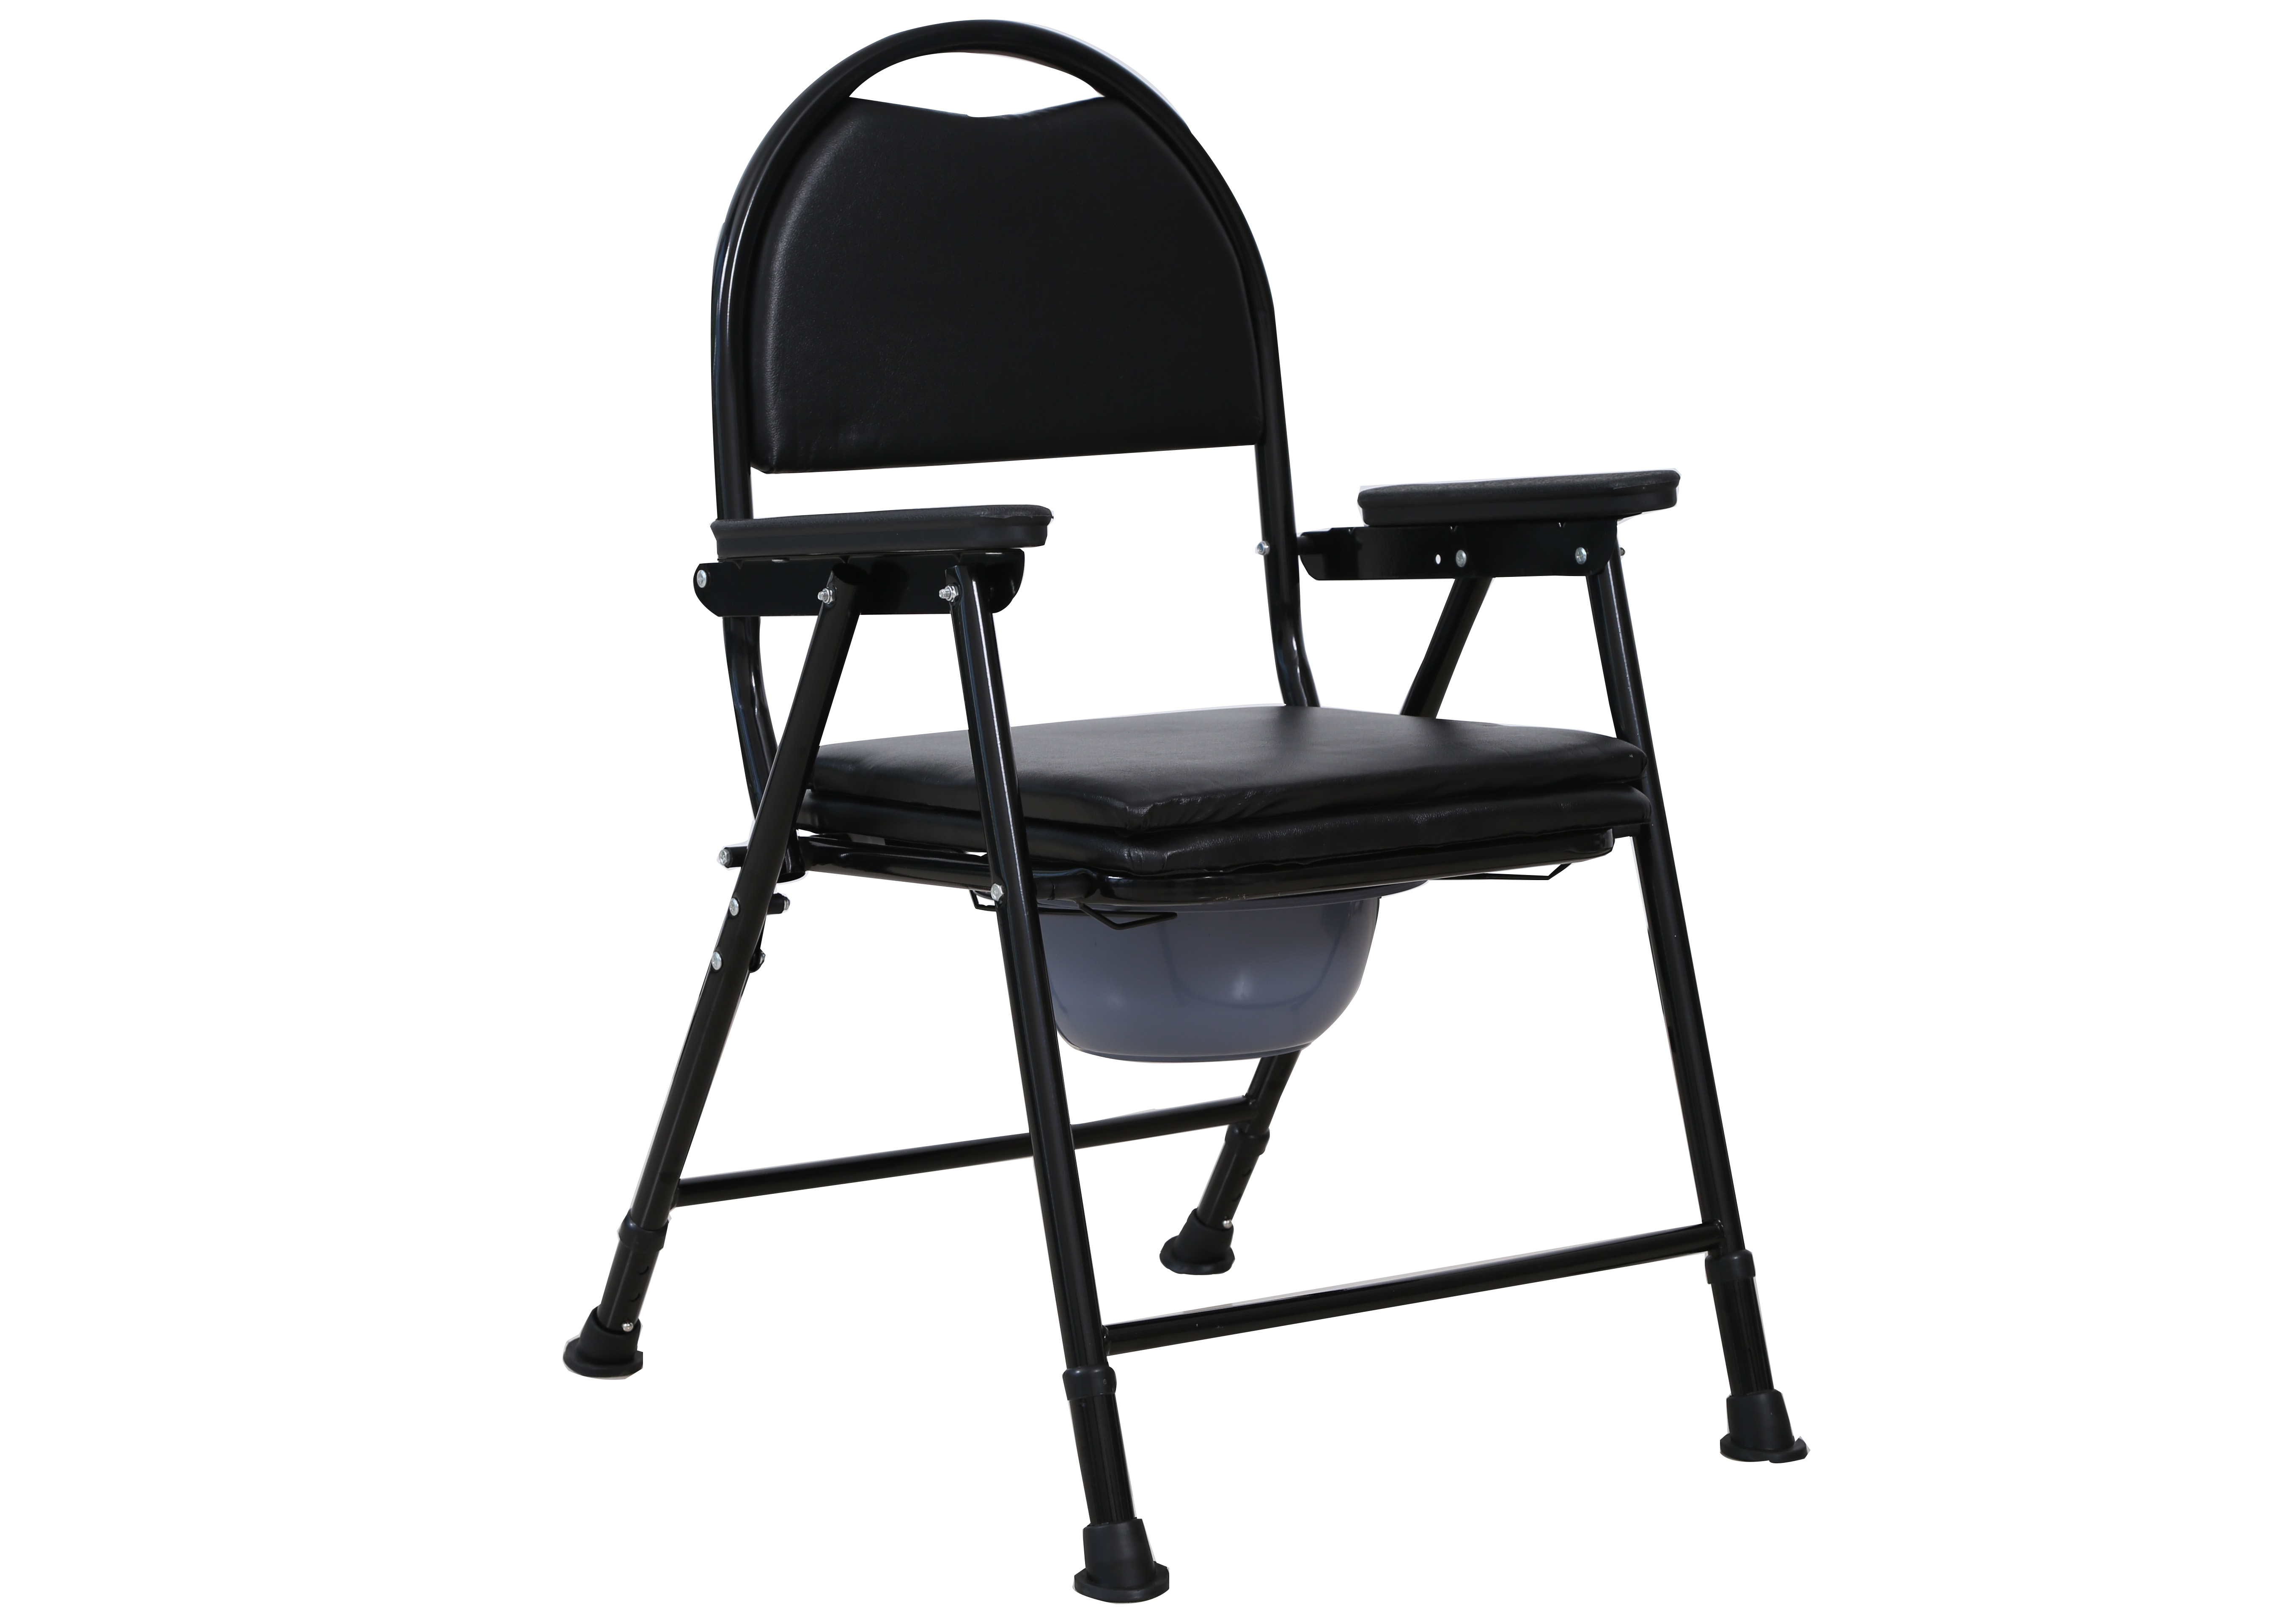 Portable folding commode chair with toilet seat